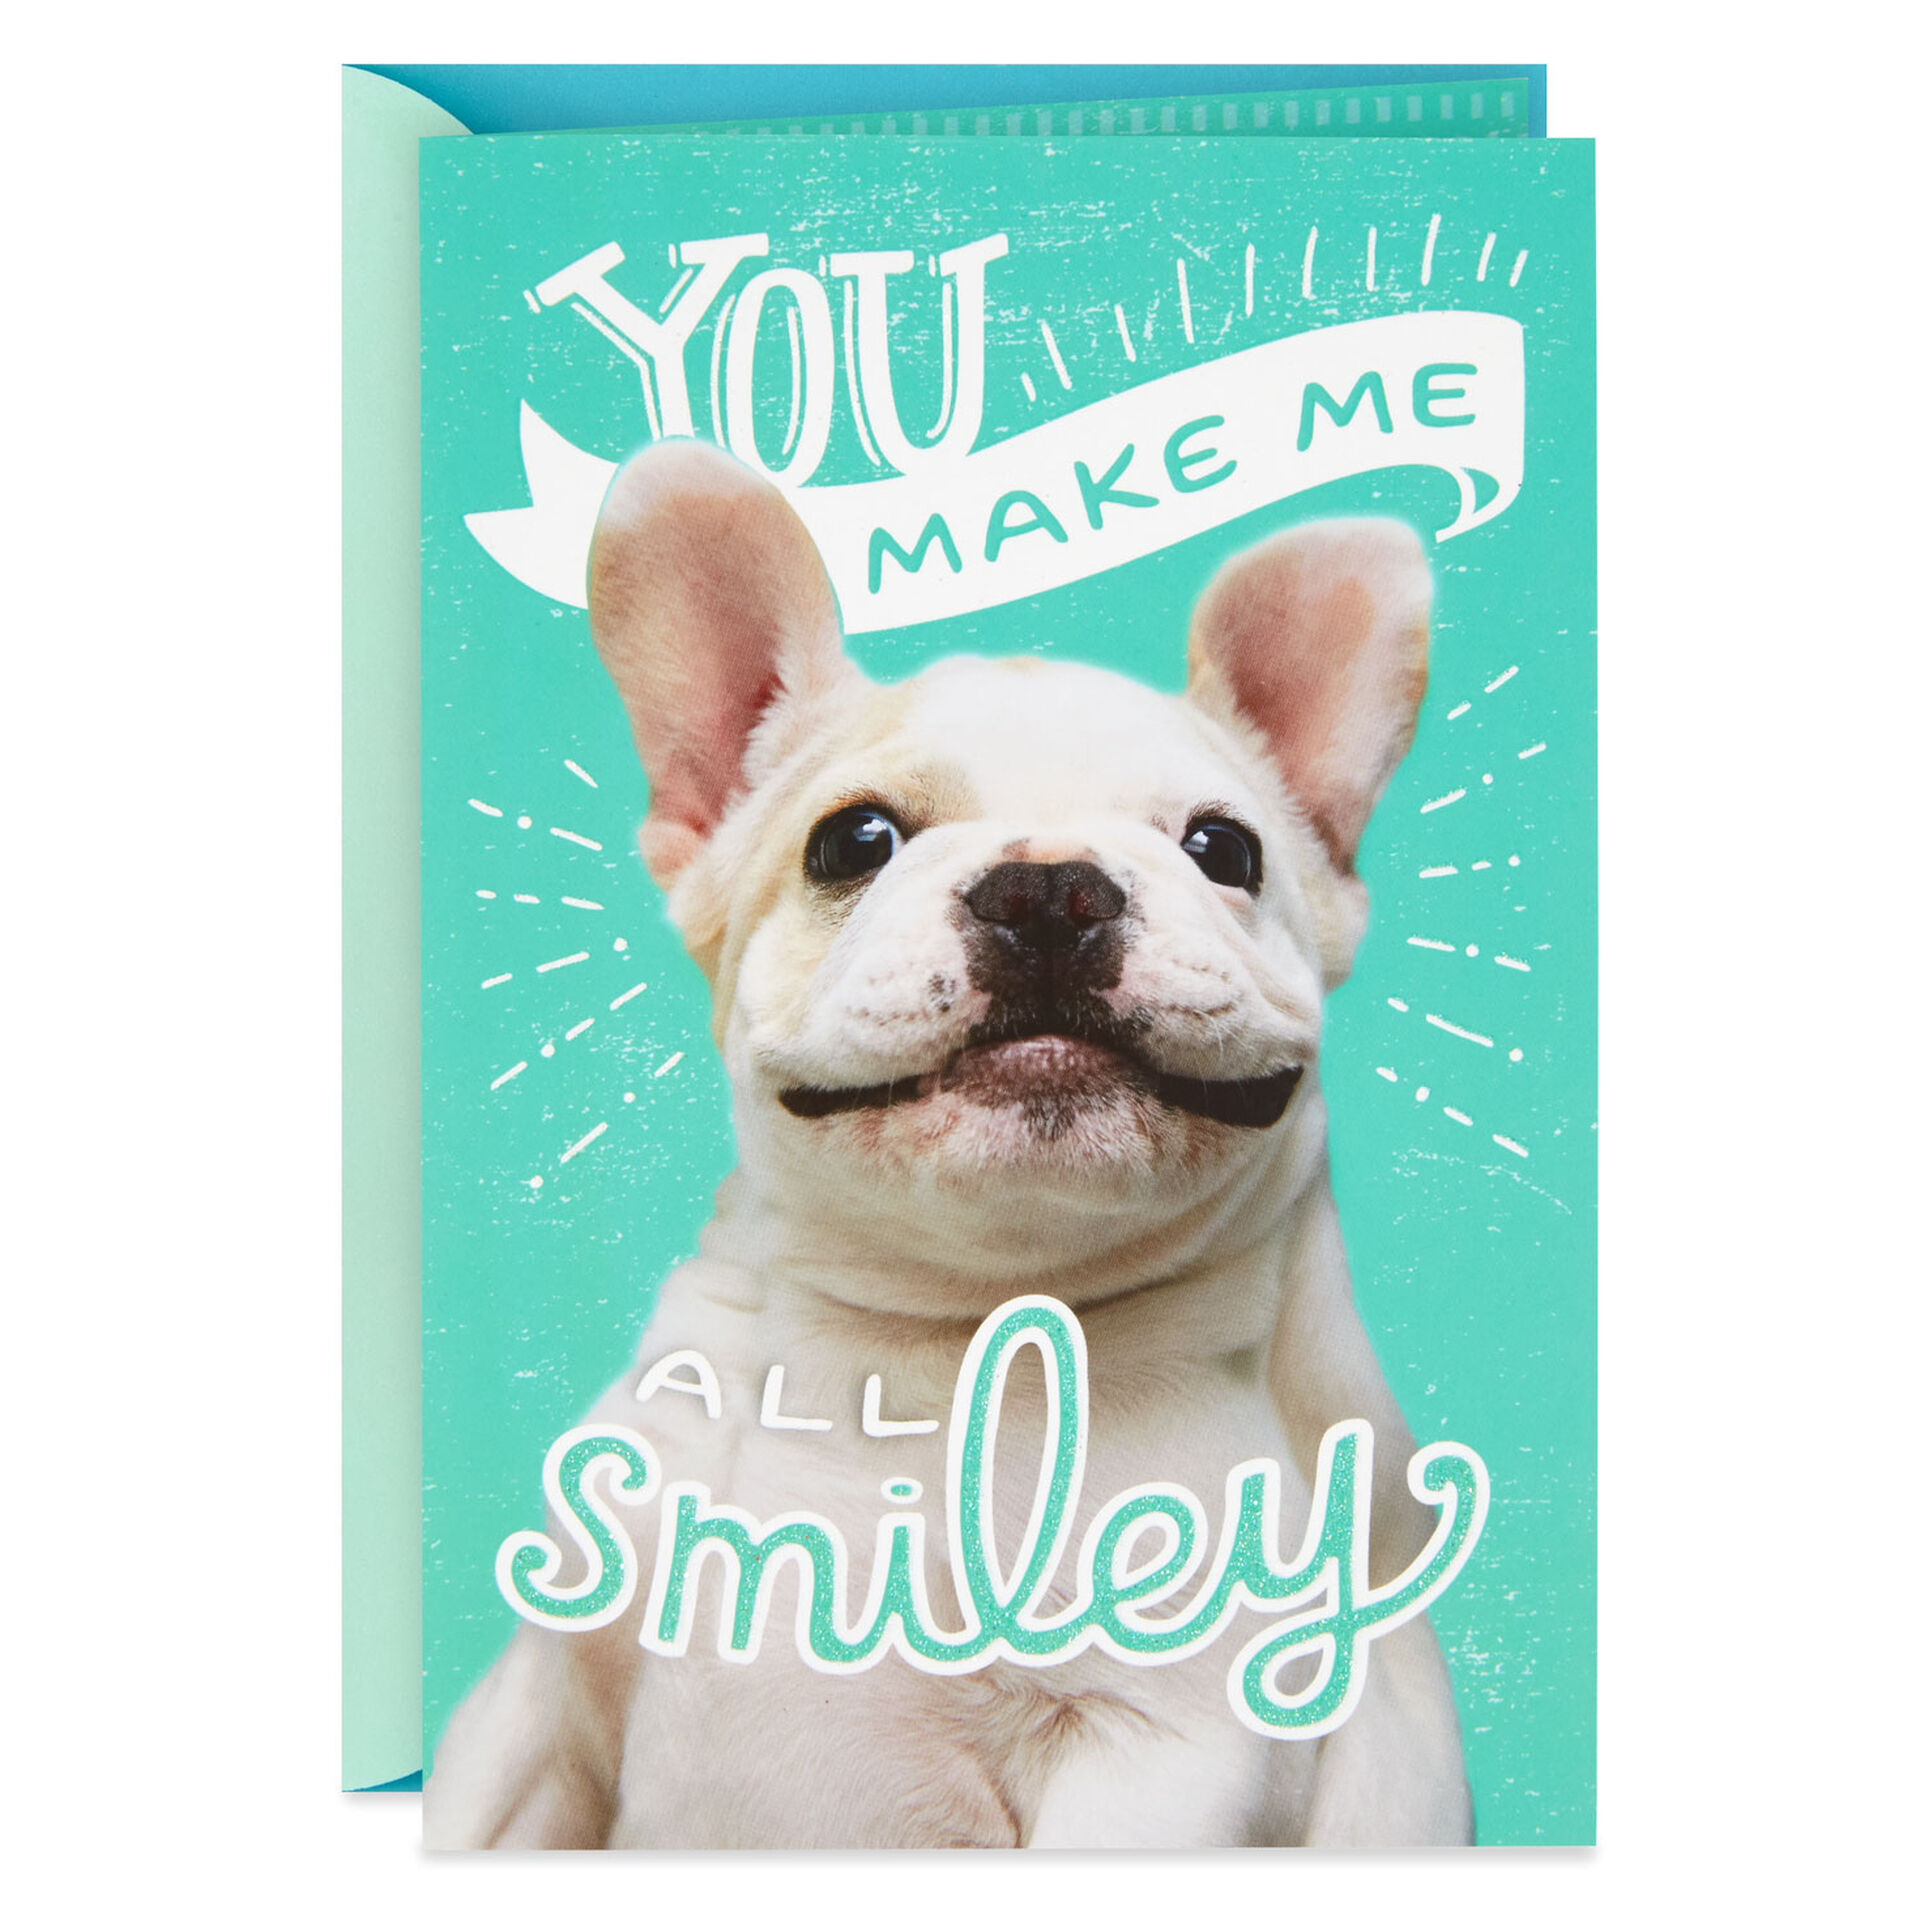 Smiley-Bulldog-Thinking-of-You-Card_379TOY1559_01